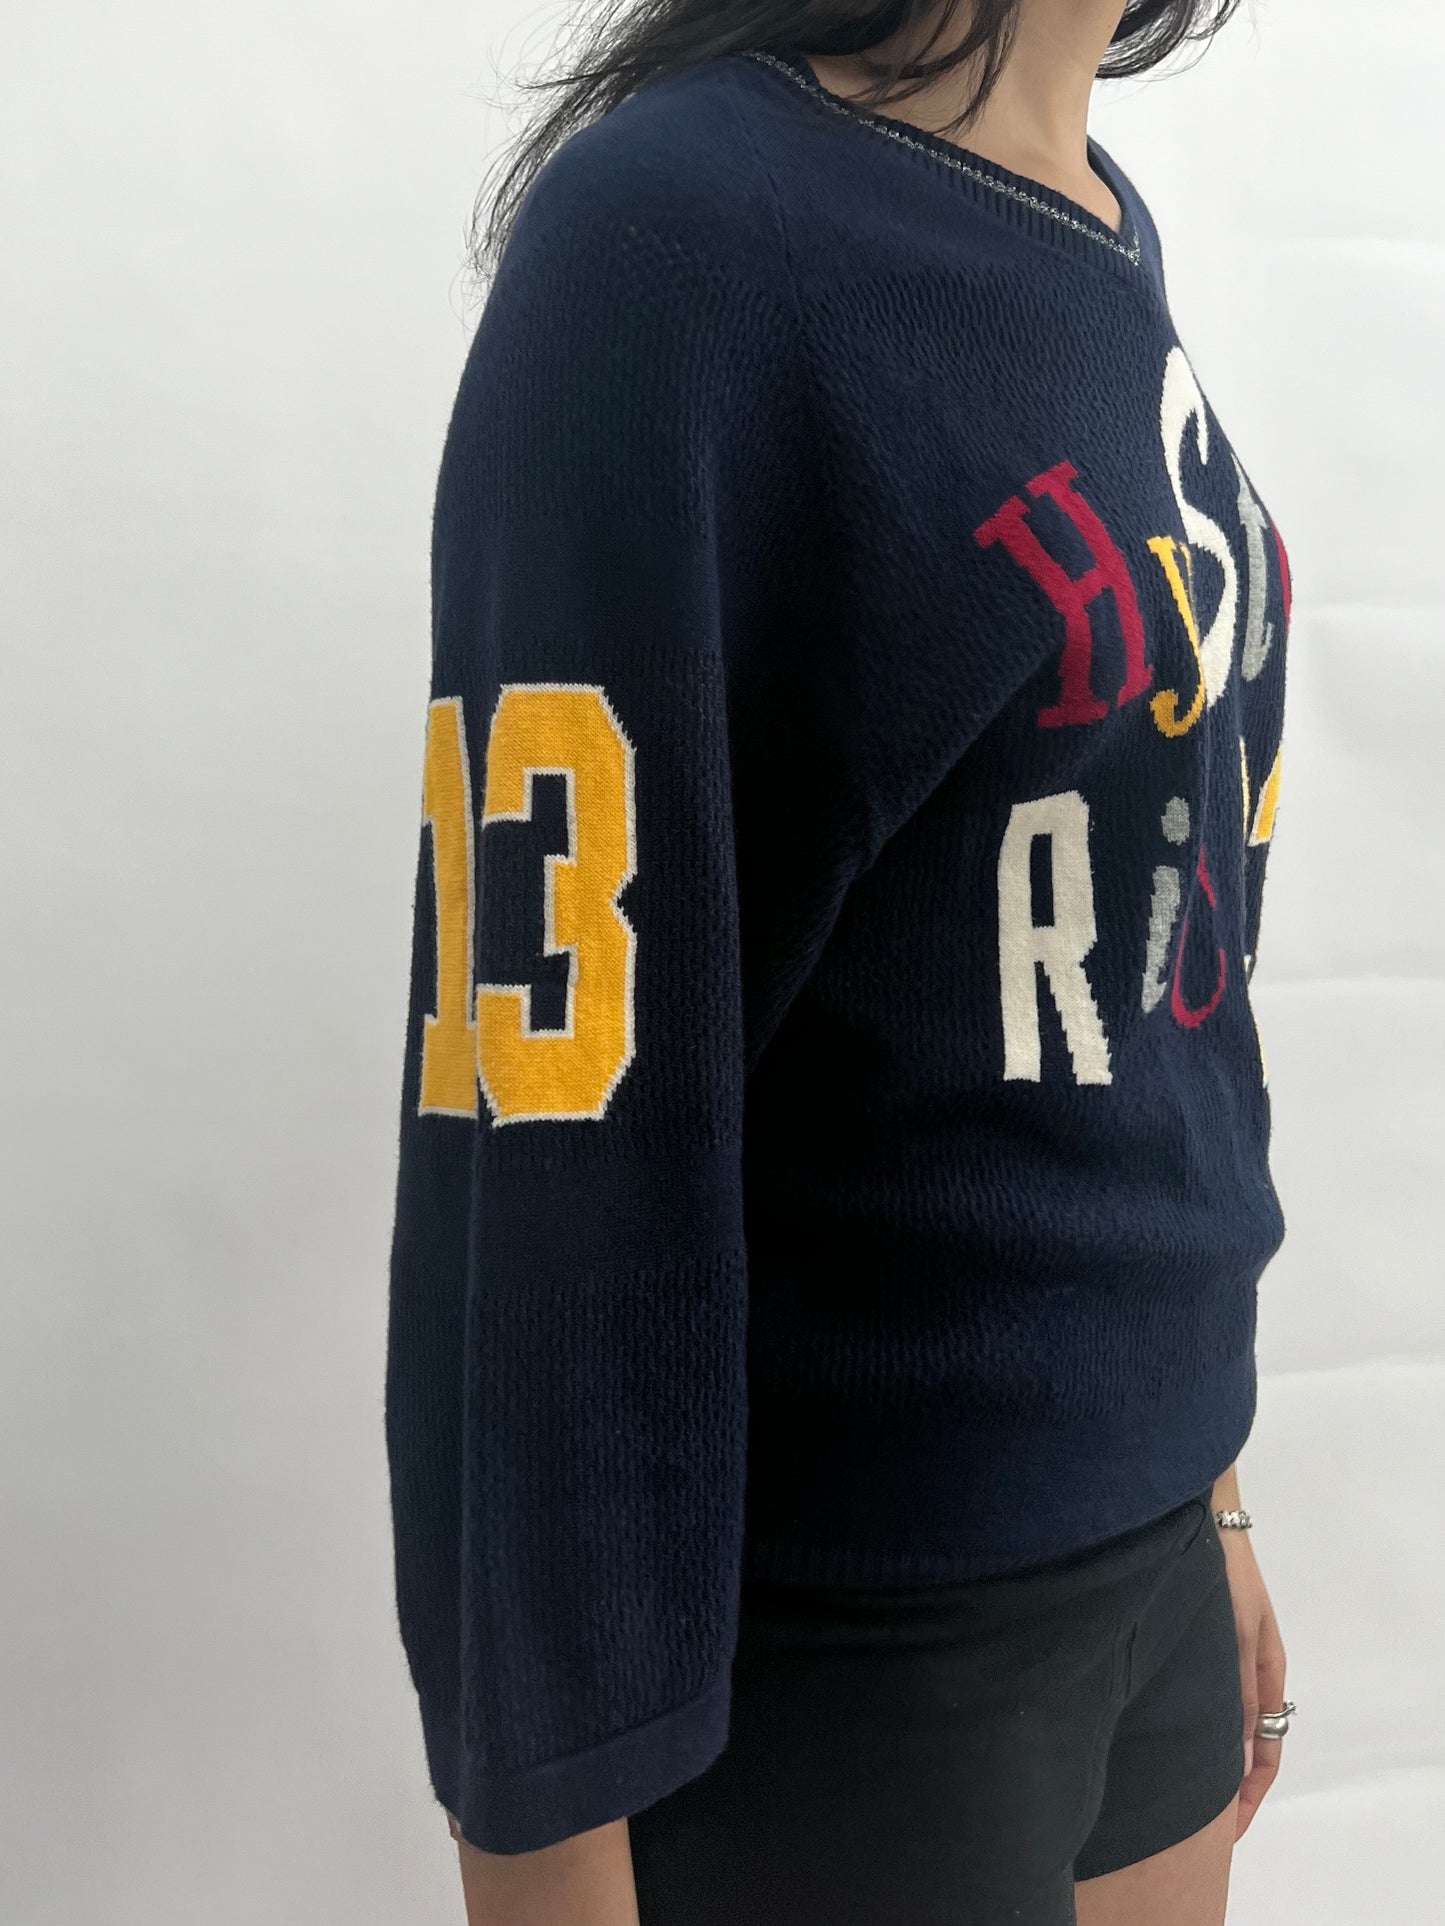 Hysteric Glamour knit jersey